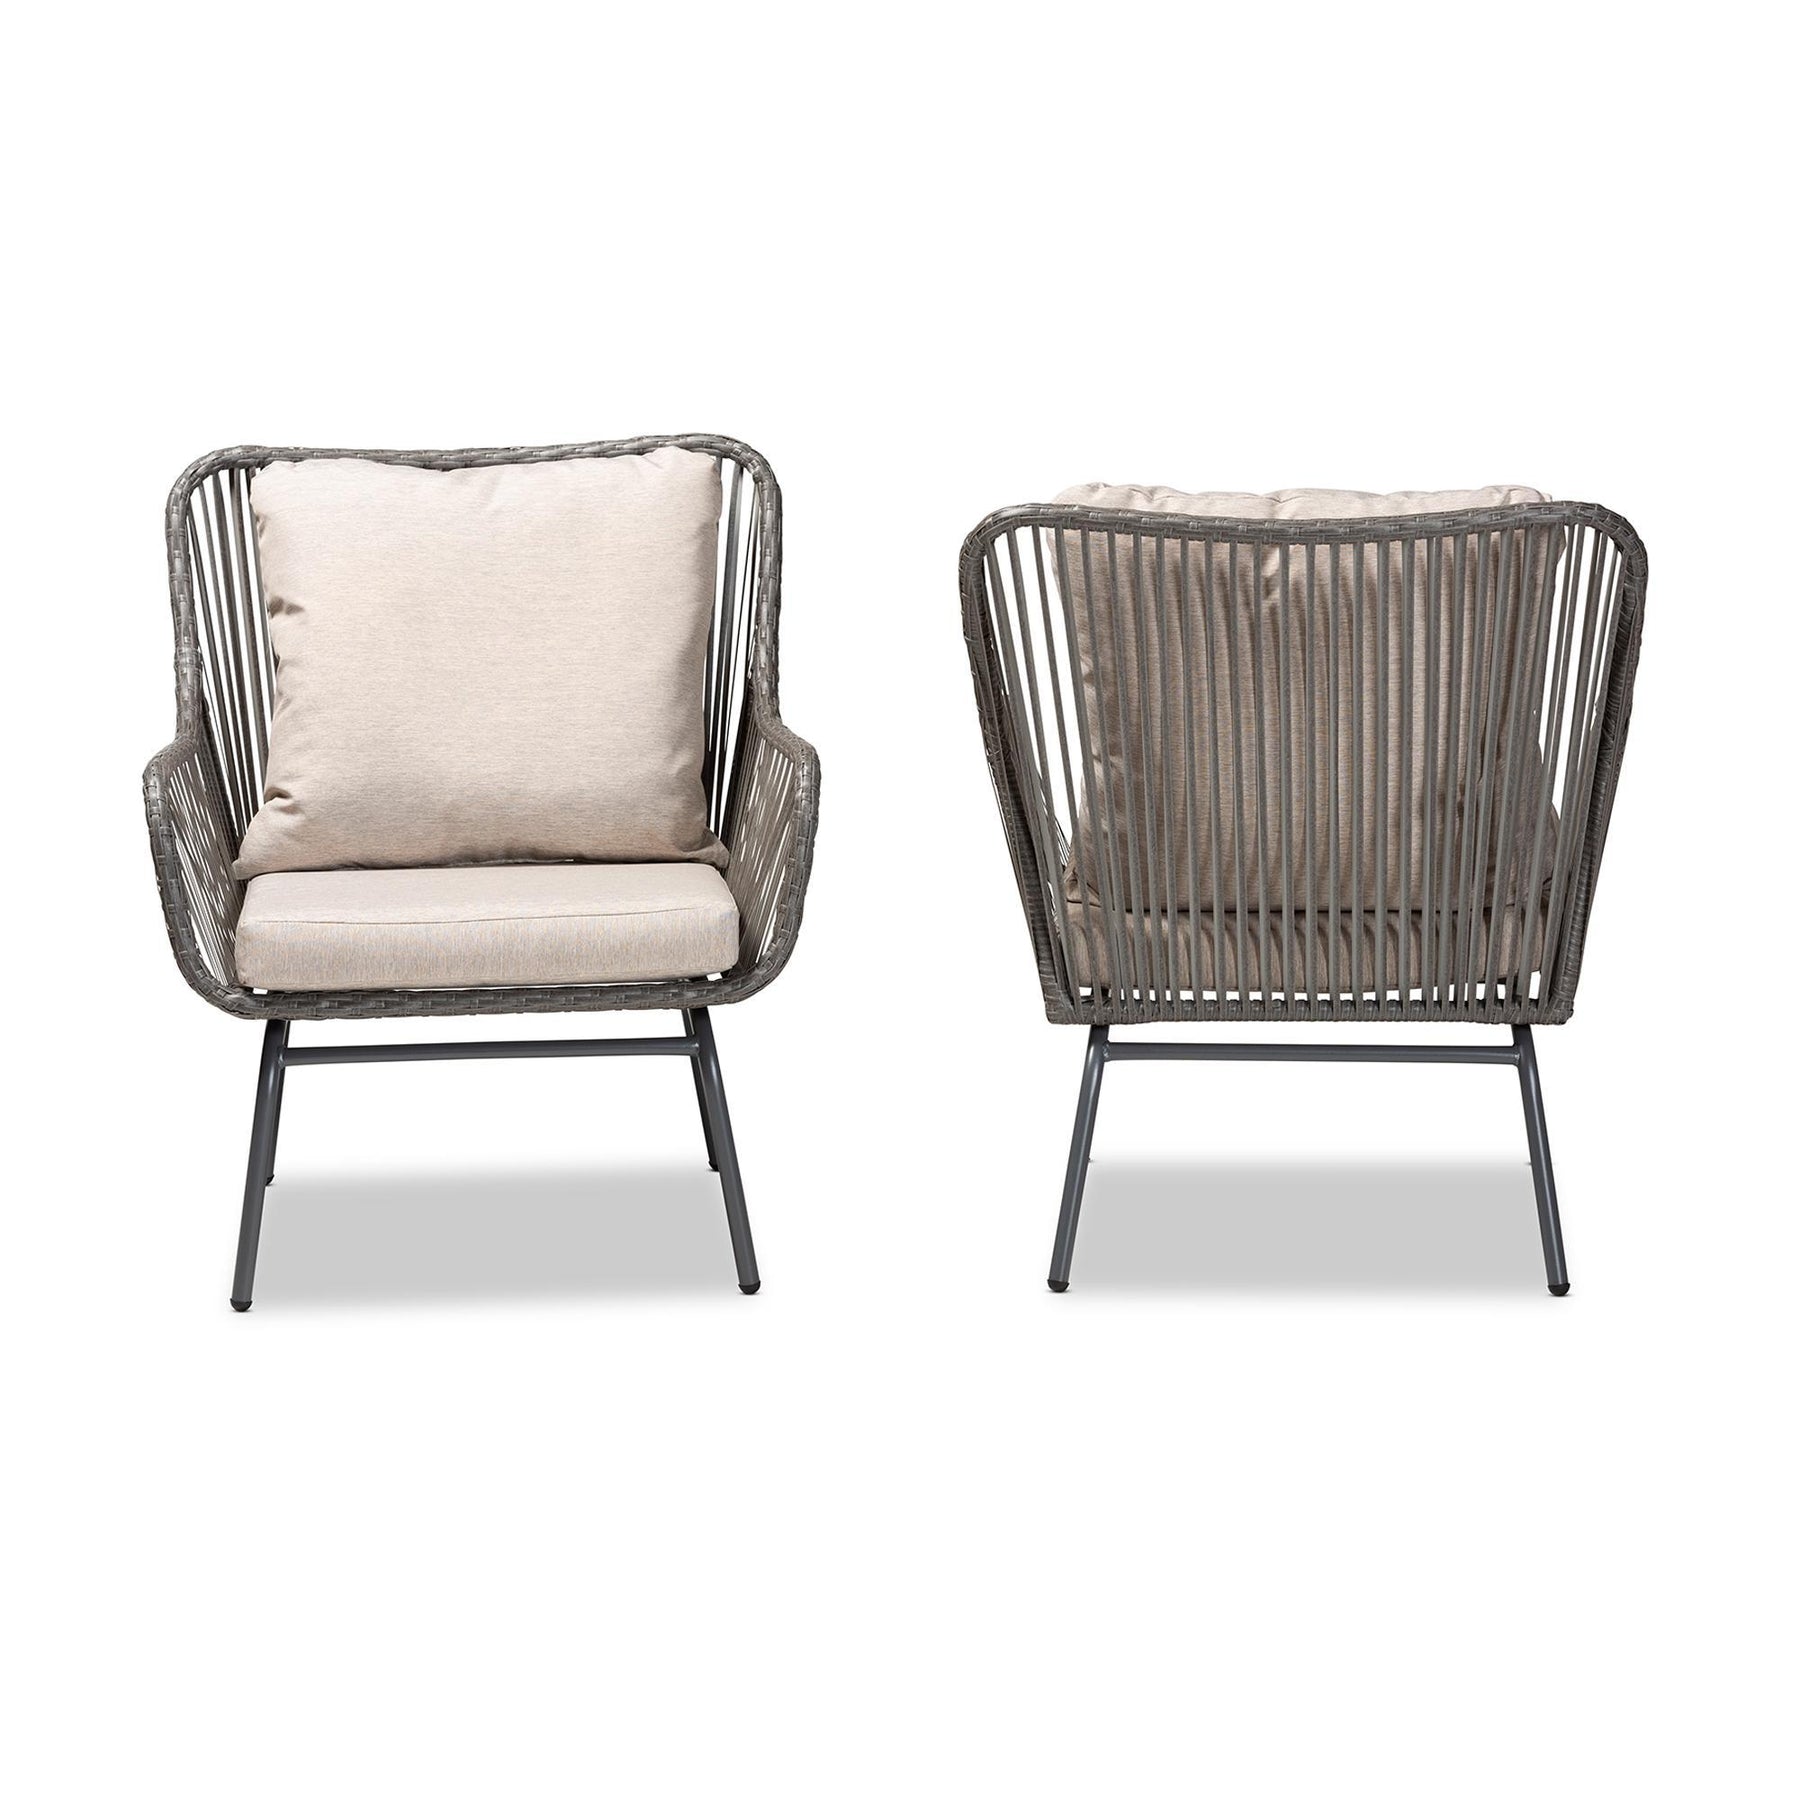 Baxton Studio Dermot Modern And Contemporary Beige Fabric And Grey Synthetic Rattan Upholstered 2-Piece Patio Chair Set - FY-0009-Faux Rattan Grey-Chair